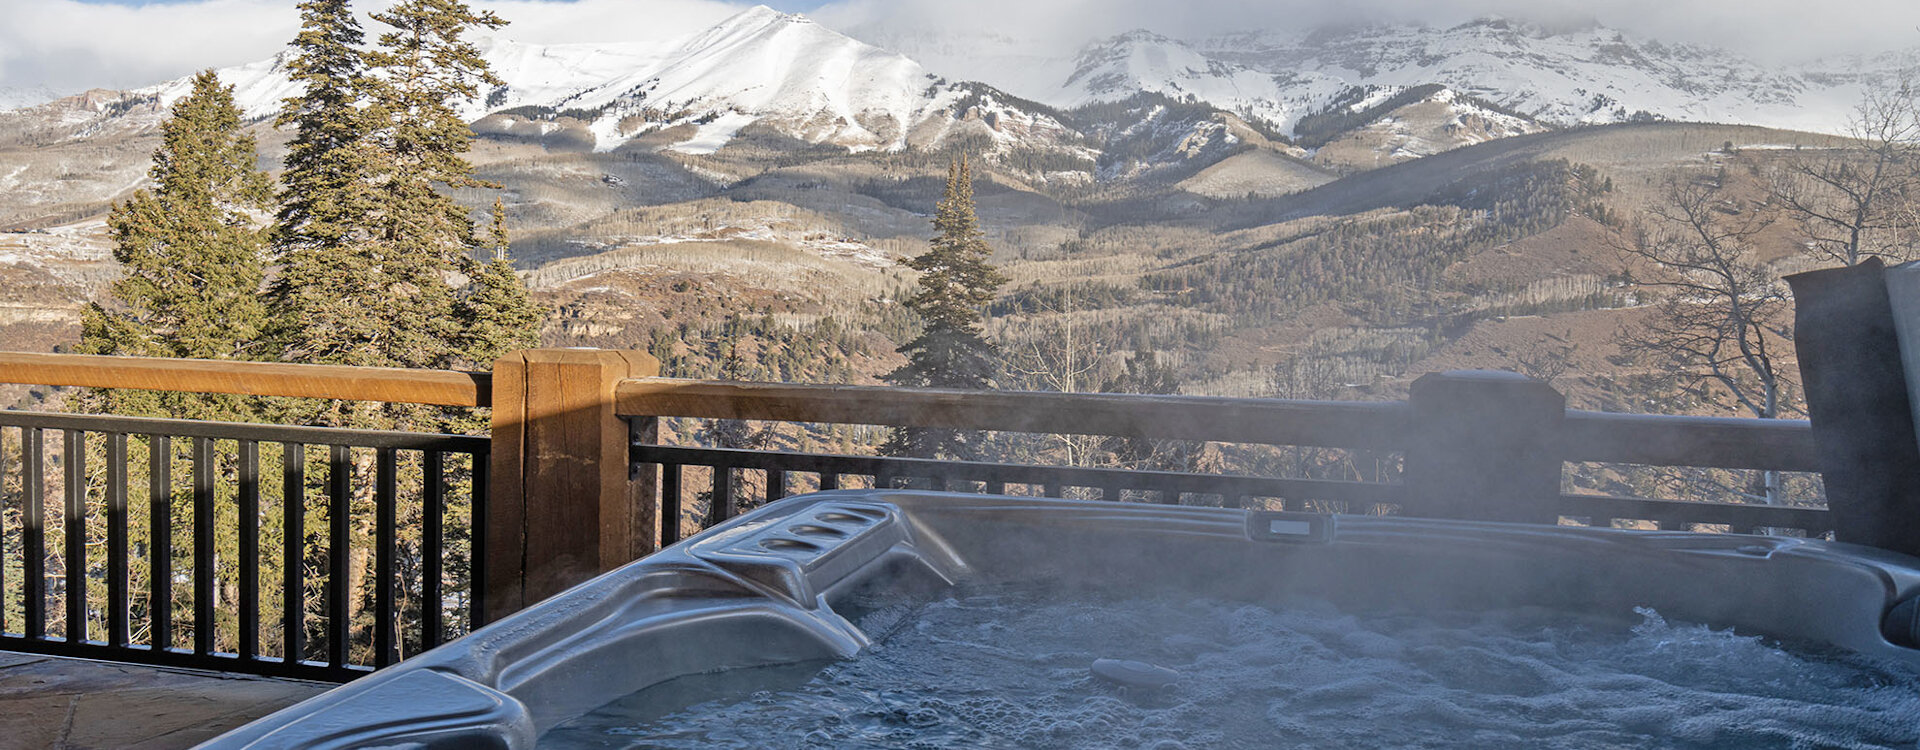 10-see-forever-121-mountain-village-hot-tub3